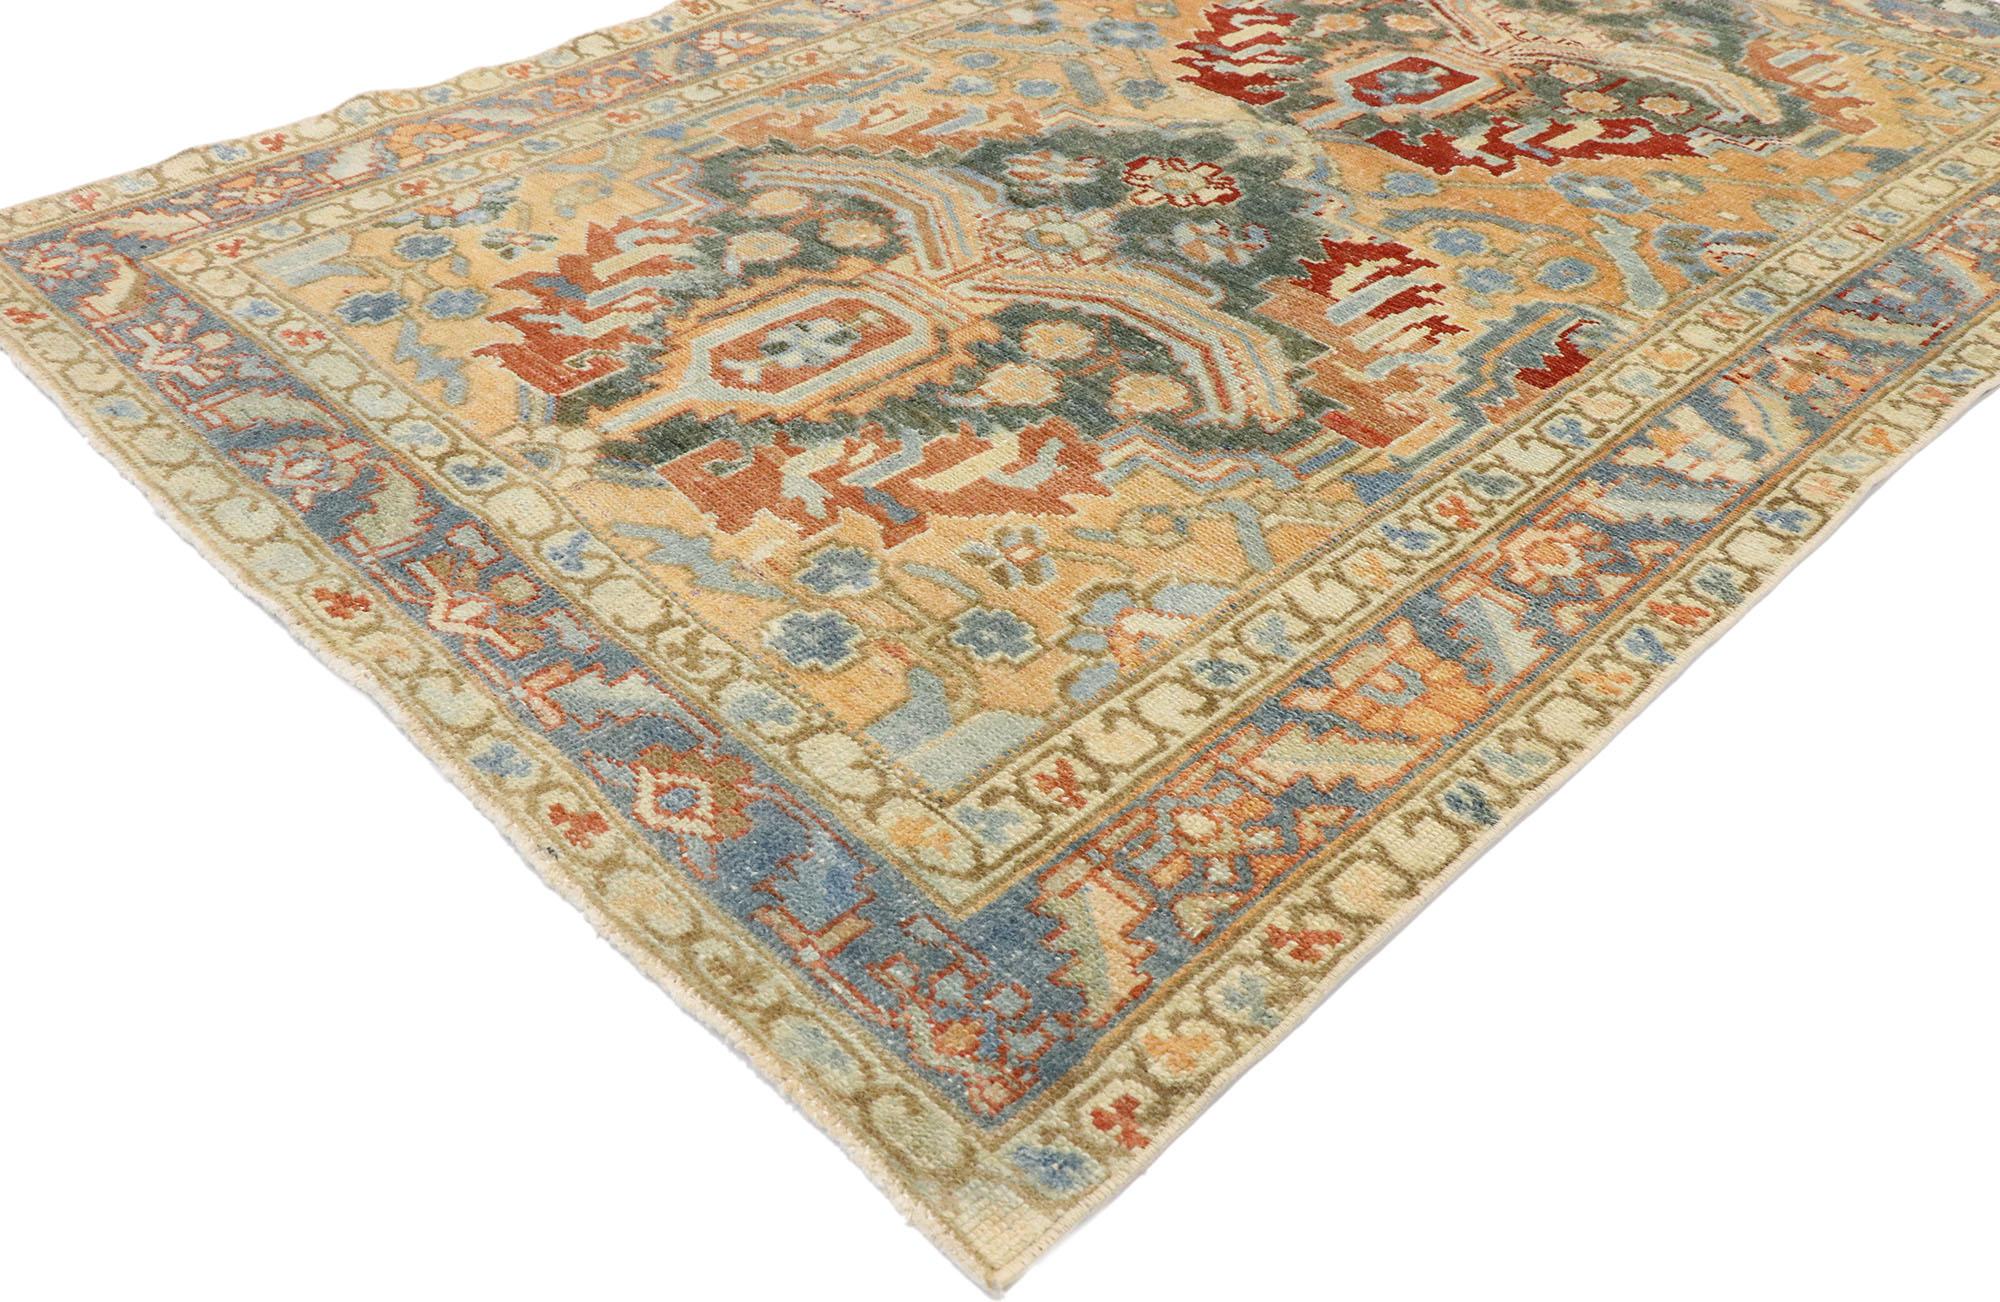 53468 Vintage Persian Heriz runner with rustic Italian Cottage style. With brilliant blues and warm orange hues inspired by Italy, this hand knotted wool vintage Persian Heriz runner beautifully embodies an Italian Rustic style. The abrashed orange